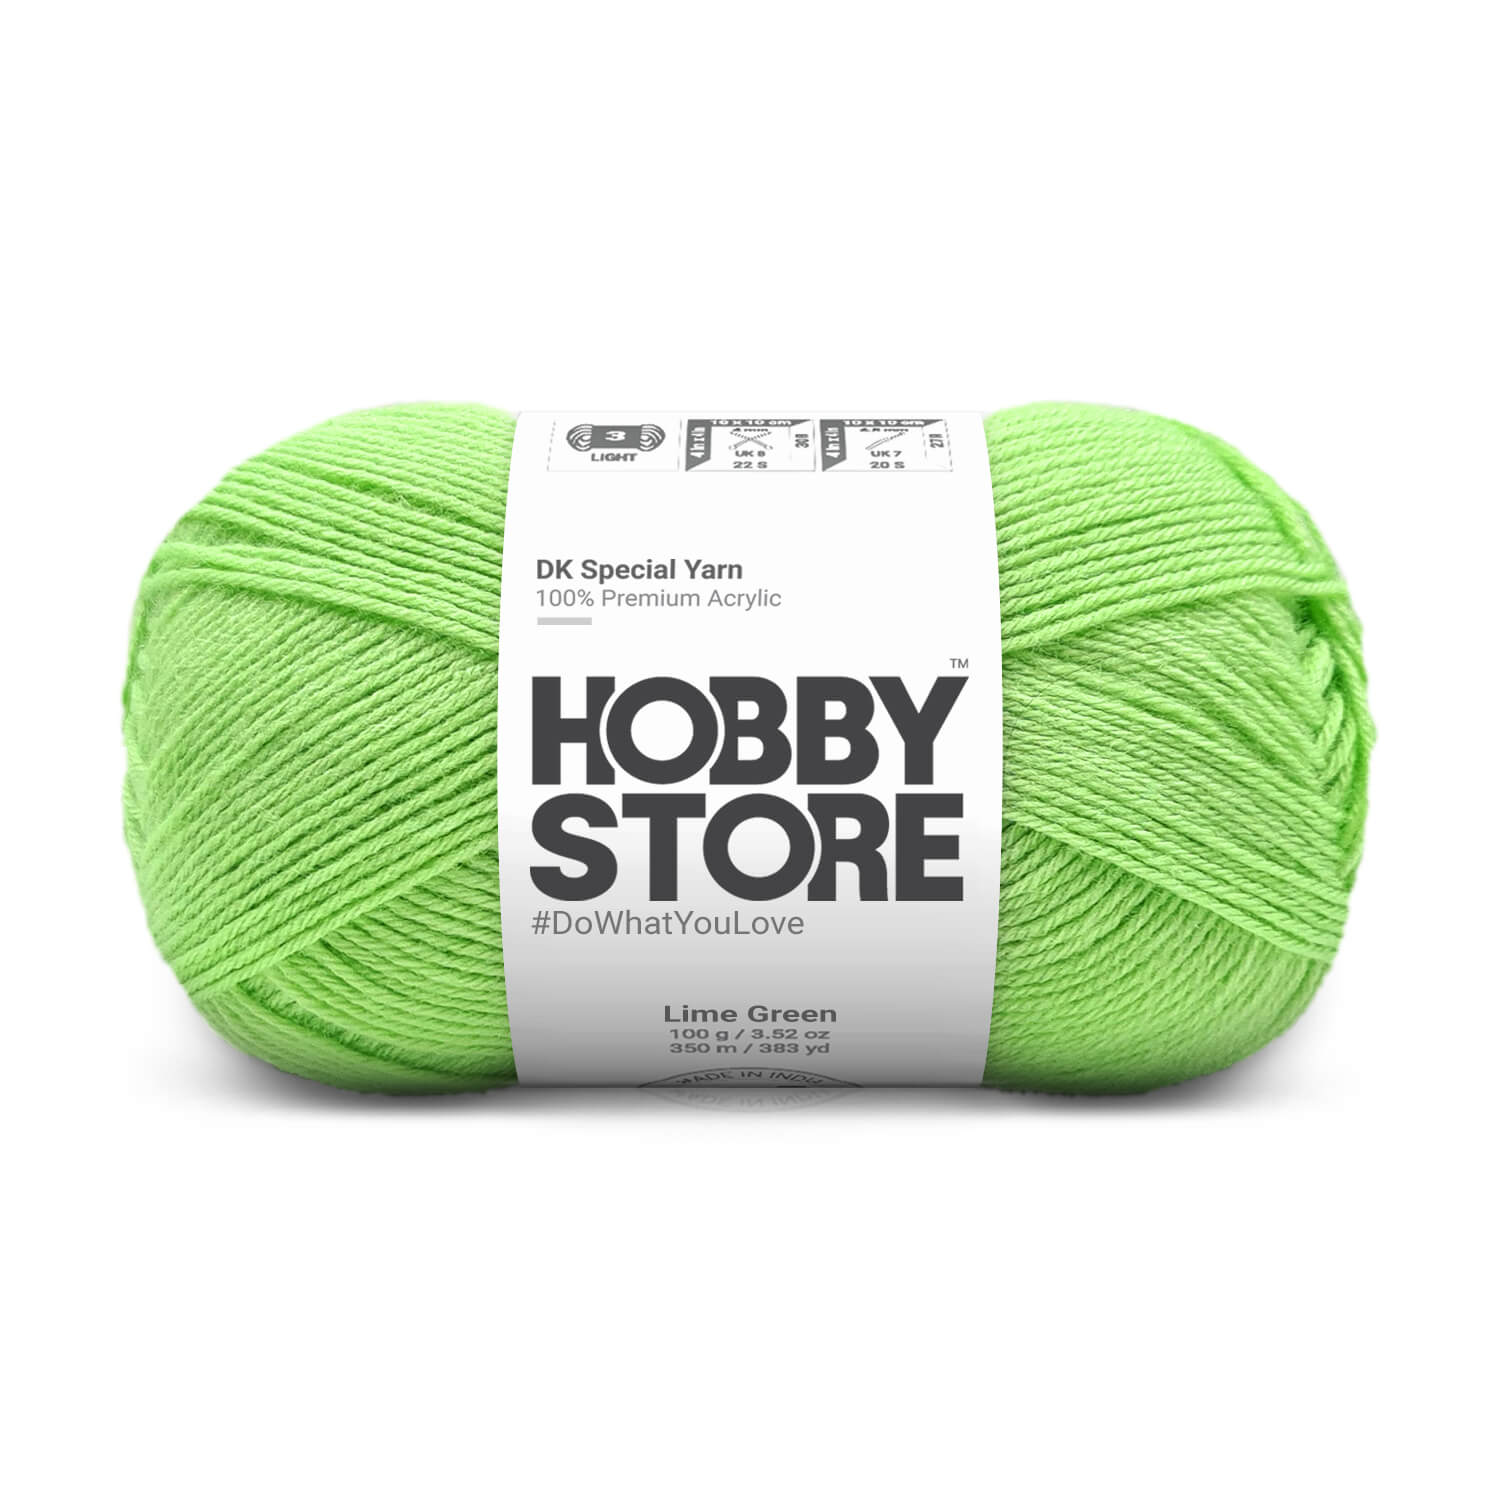 Hobby Store DK Special Yarn - Lime Green 5026